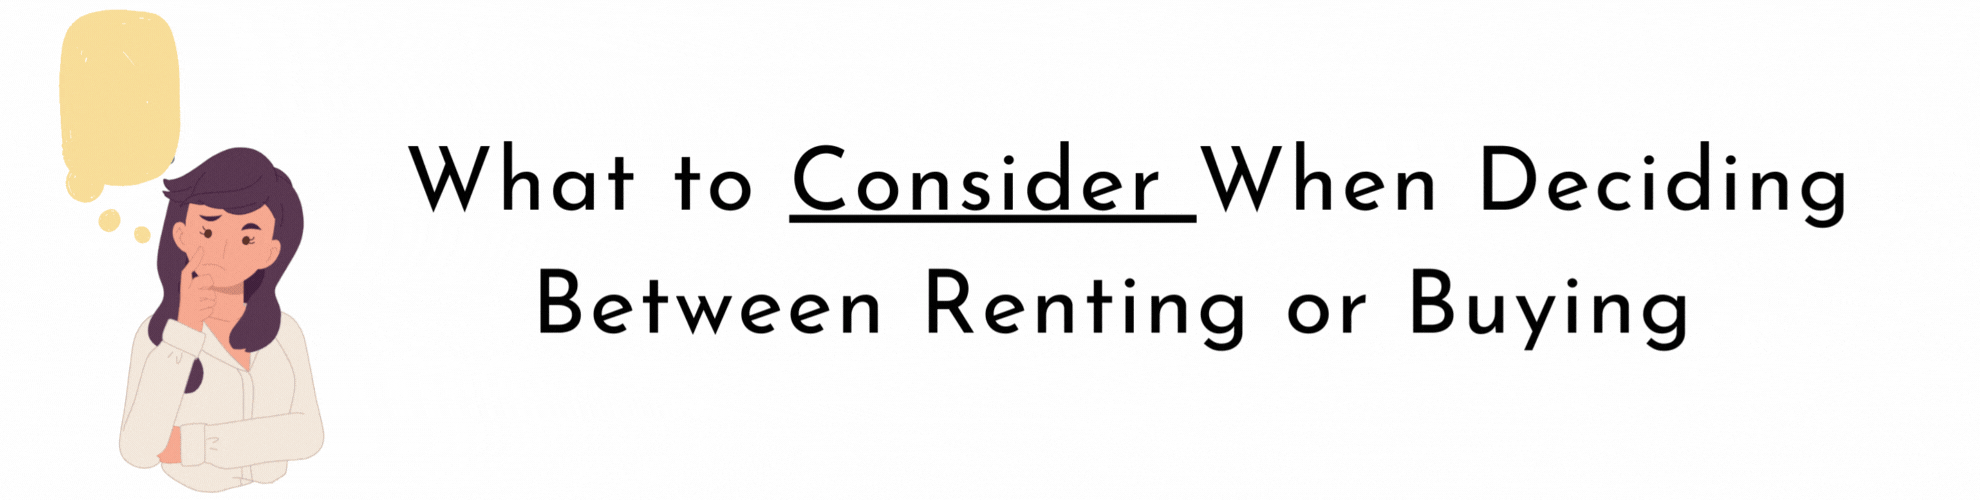 What to Consider When Deciding Between Renting or Buying 